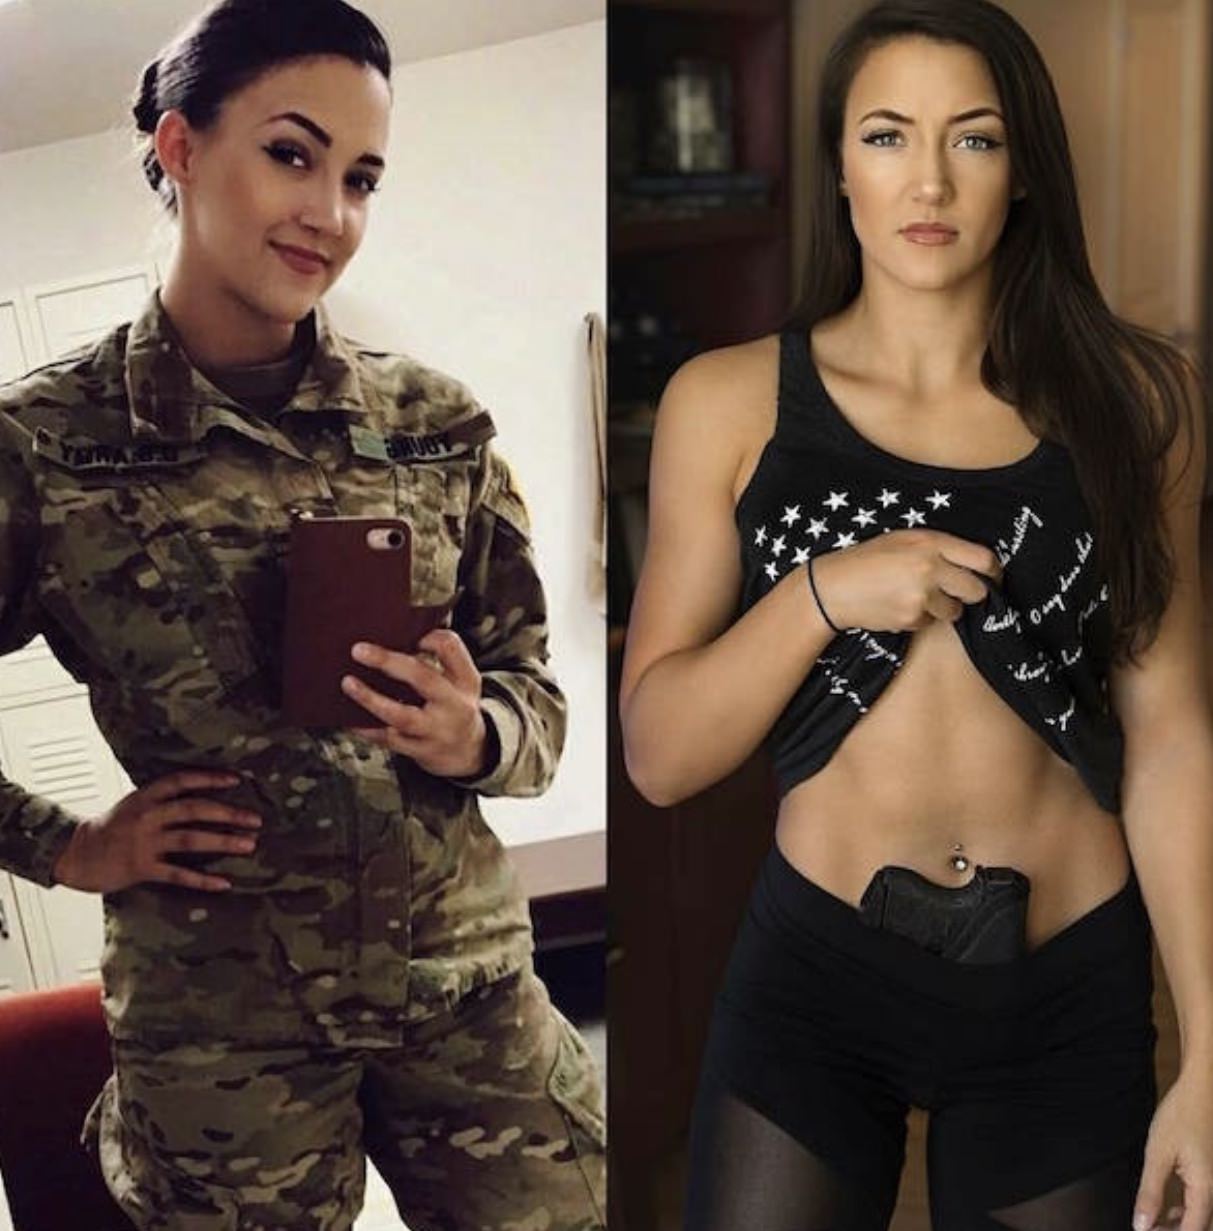 Attractive brunette wearing military fatigues taking a selfie and picture of her lifting her tank top to reveal abs and a handgun